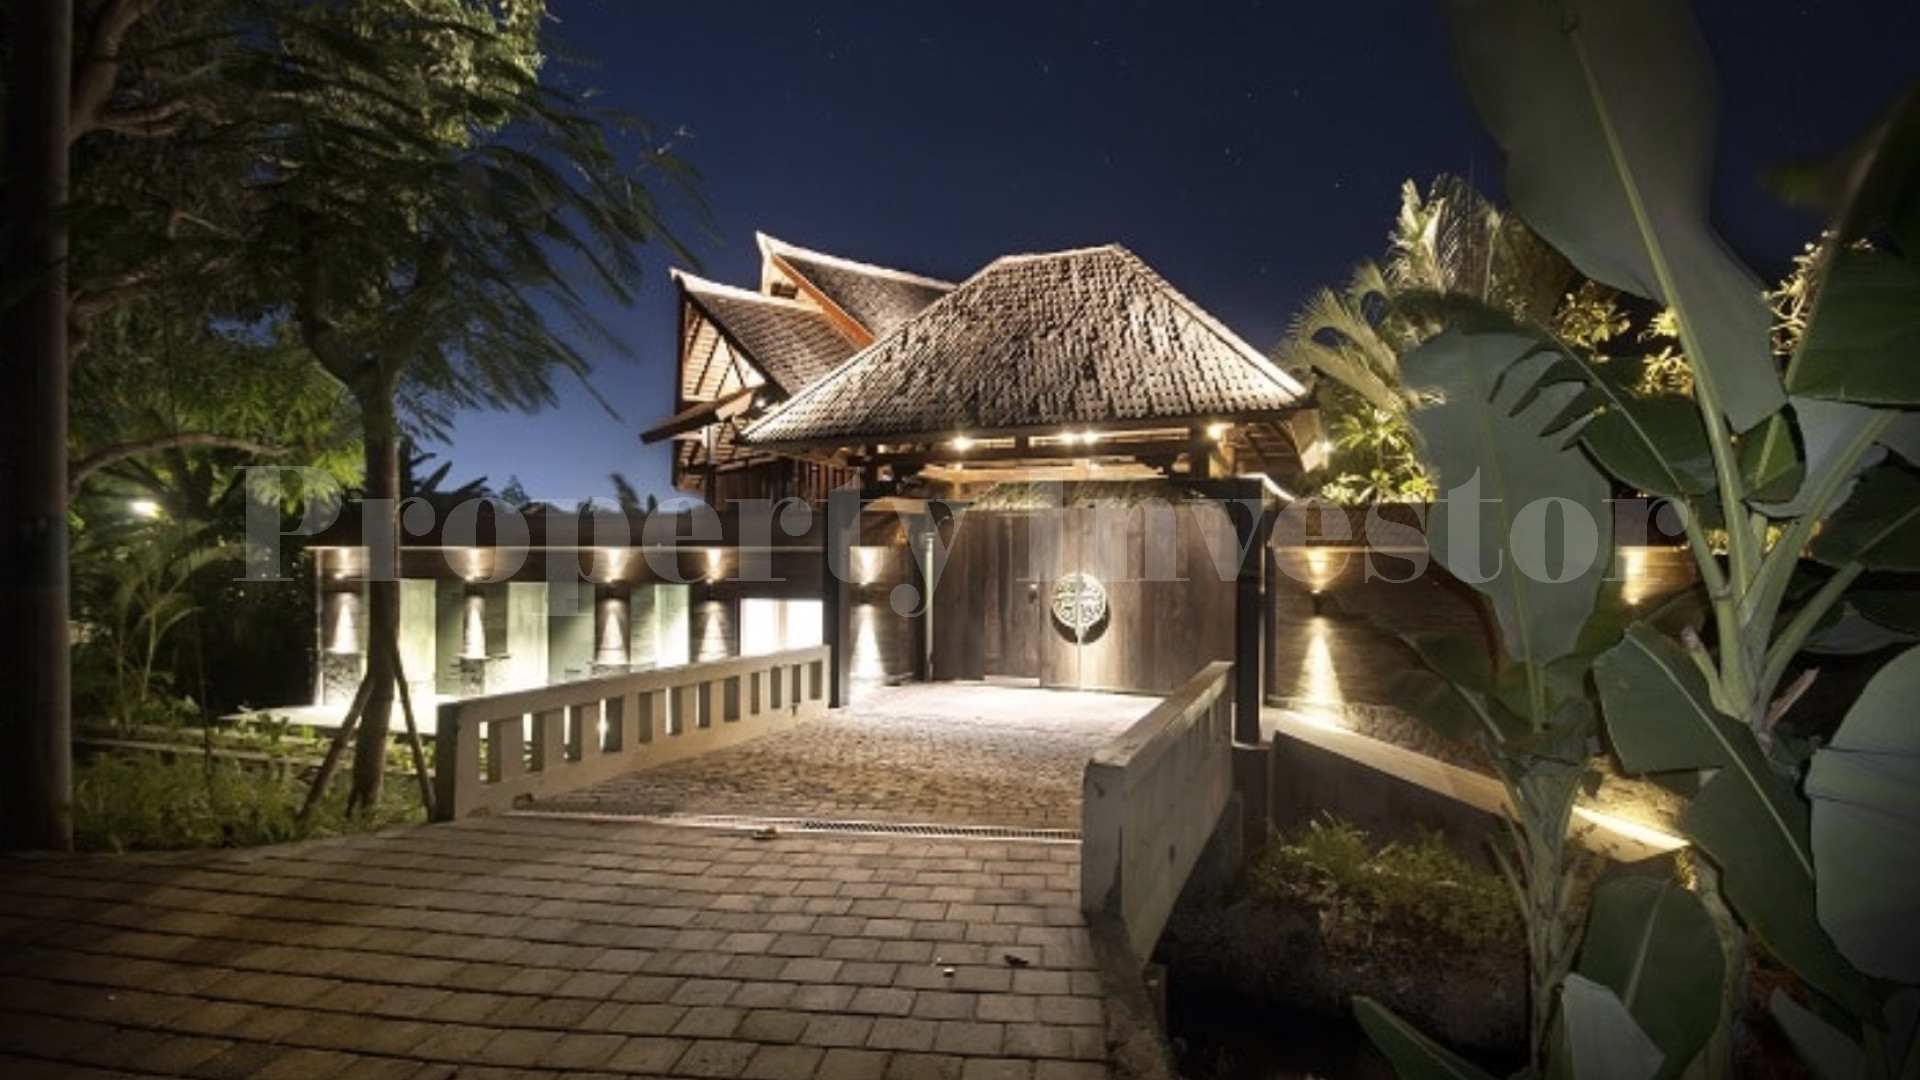 Exquisite 5 Bedroom Luxury Estate with 3 Uniquely Designed Villas & Manicured Gardens for Sale in Pererenan, Bali